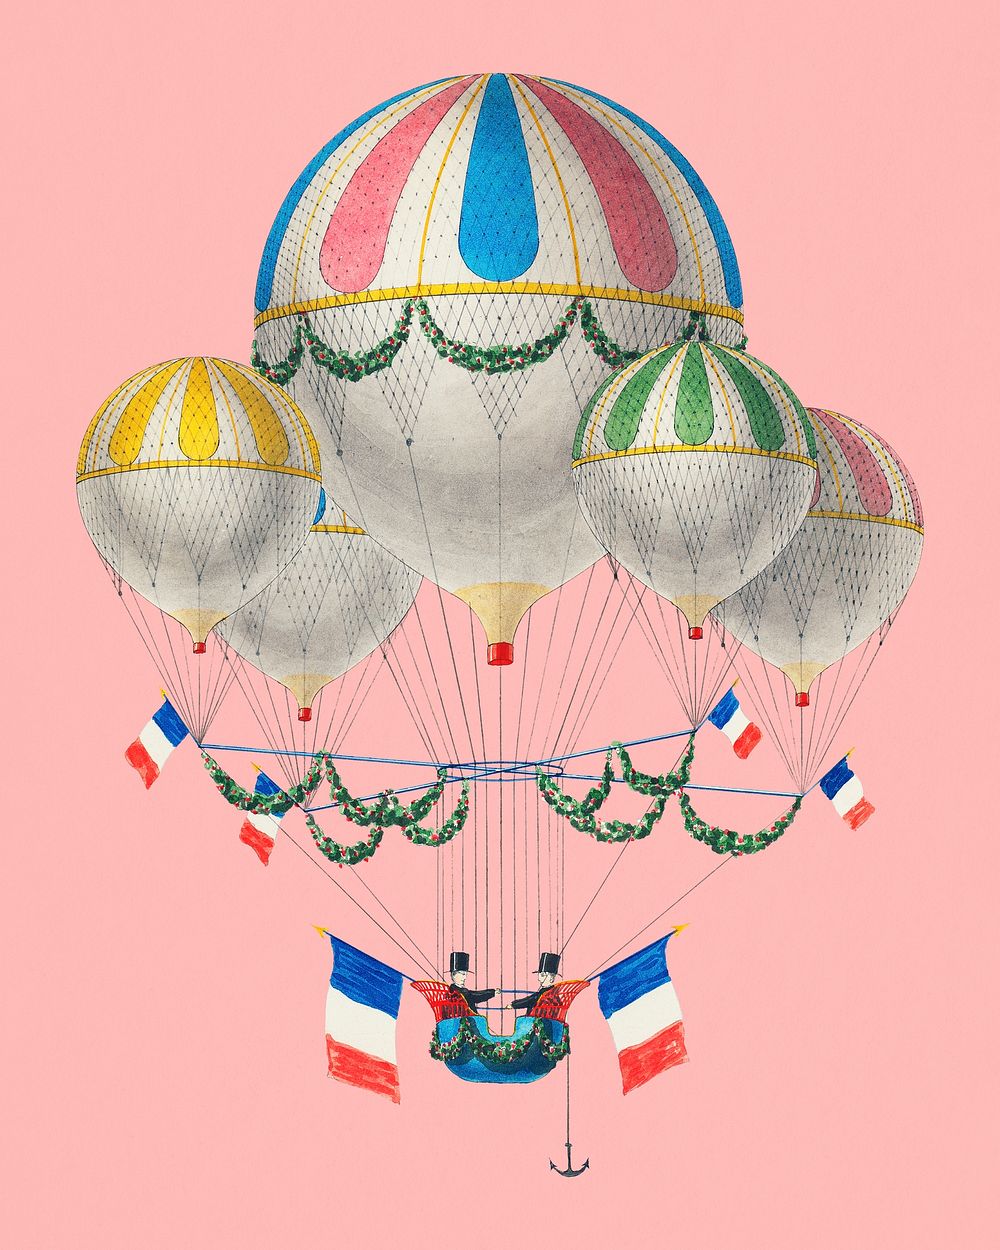 Vintage balloon illustration, traditional air transportation psd, remix from the artwork of Imprimeur E. Pichot